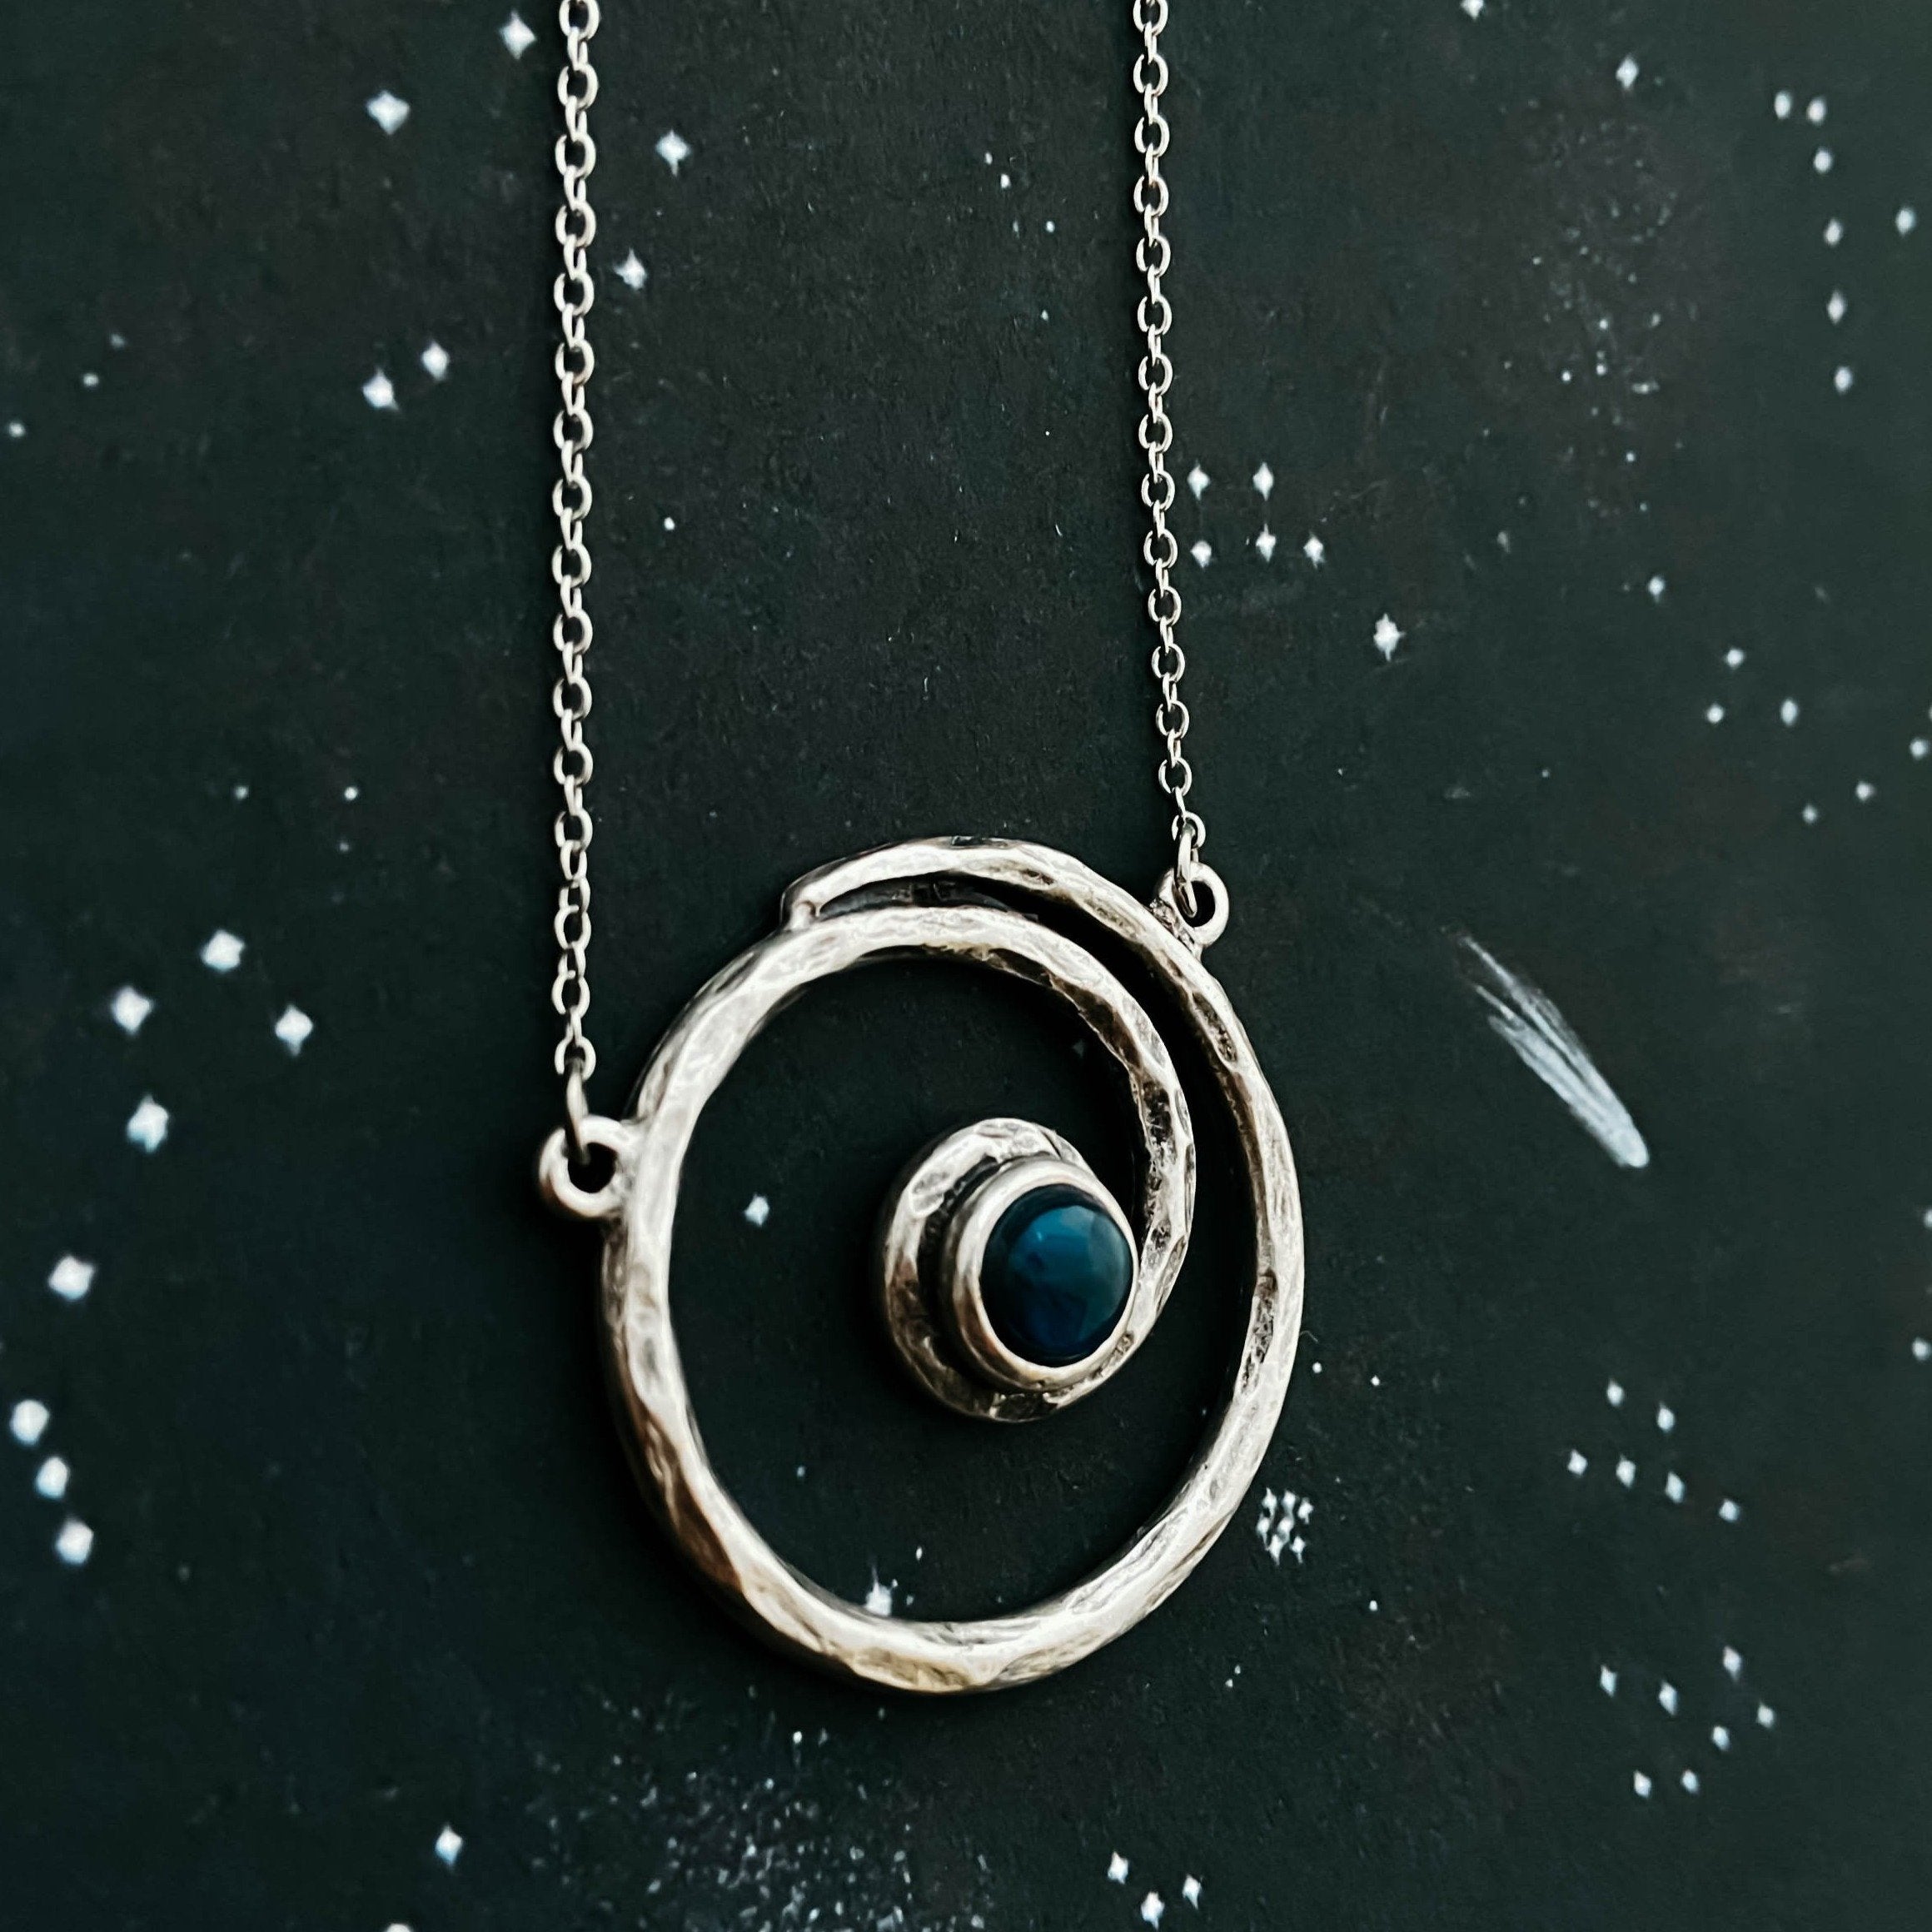 Spiral Silver Milky Way Jewelry Set with Blue Labradorite Stones - Necklace and Earrings - Jewelry & Watches - Bijou Her -  -  - 